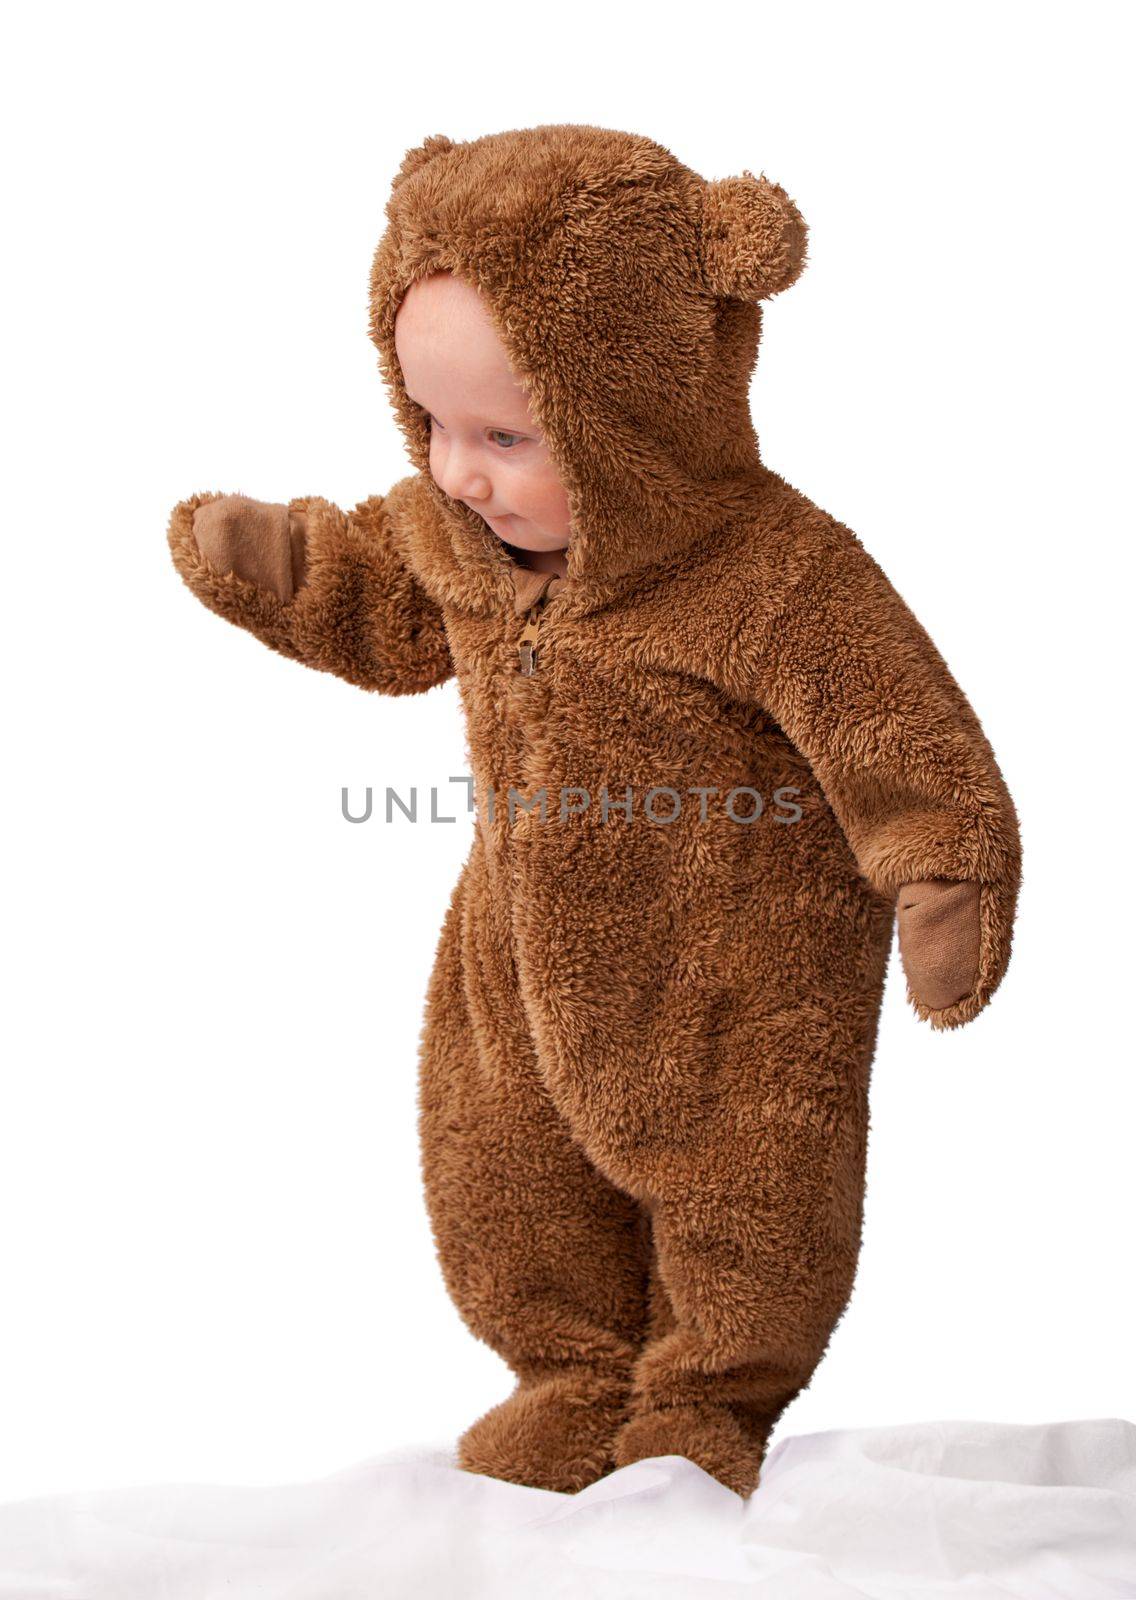 Teddys have never been cuter. Studio shot of a little boy dressed up as a teddy bear